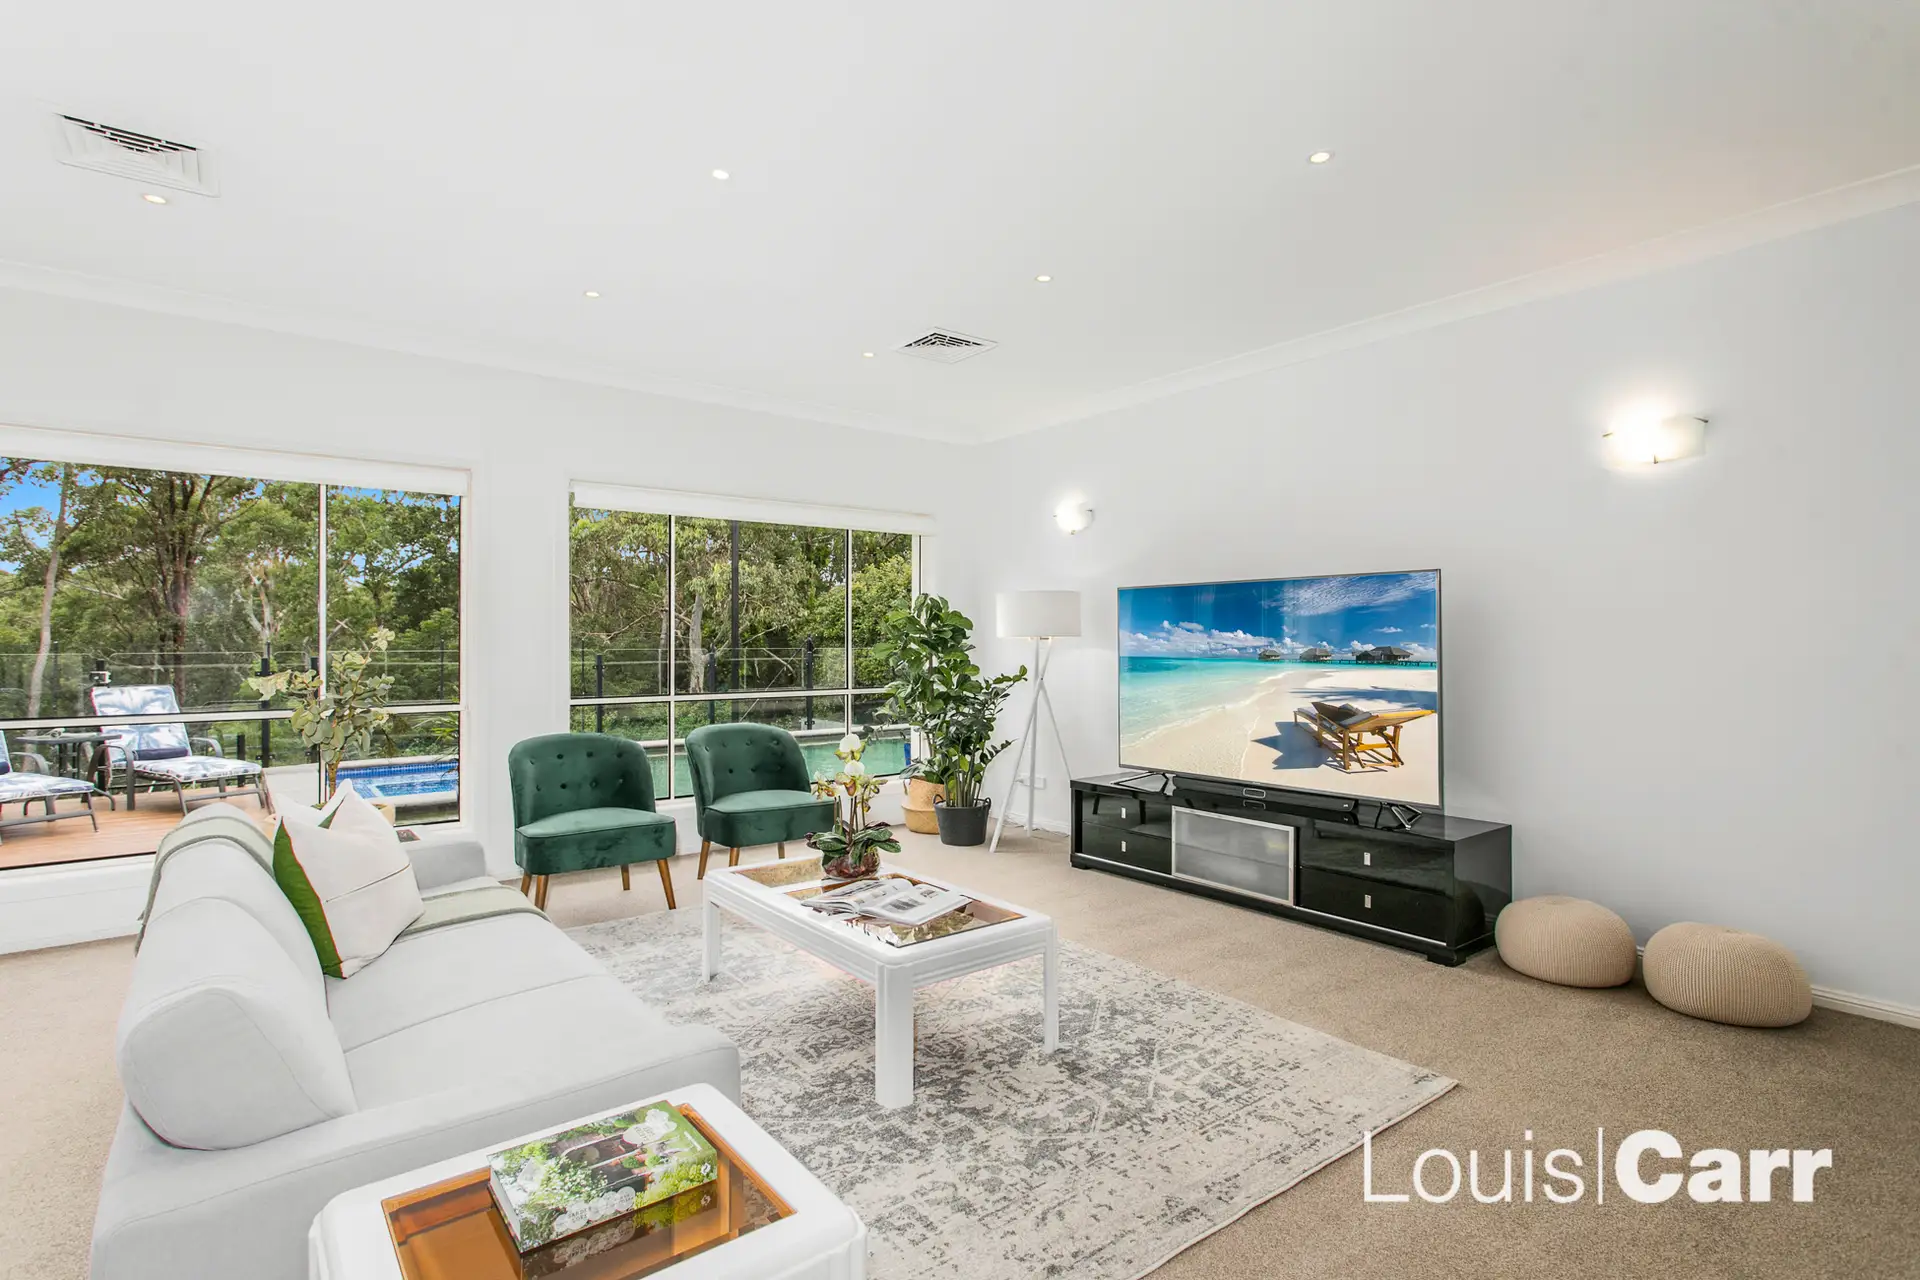 Photo #8: 4 Governor Phillip Place, West Pennant Hills - Sold by Louis Carr Real Estate